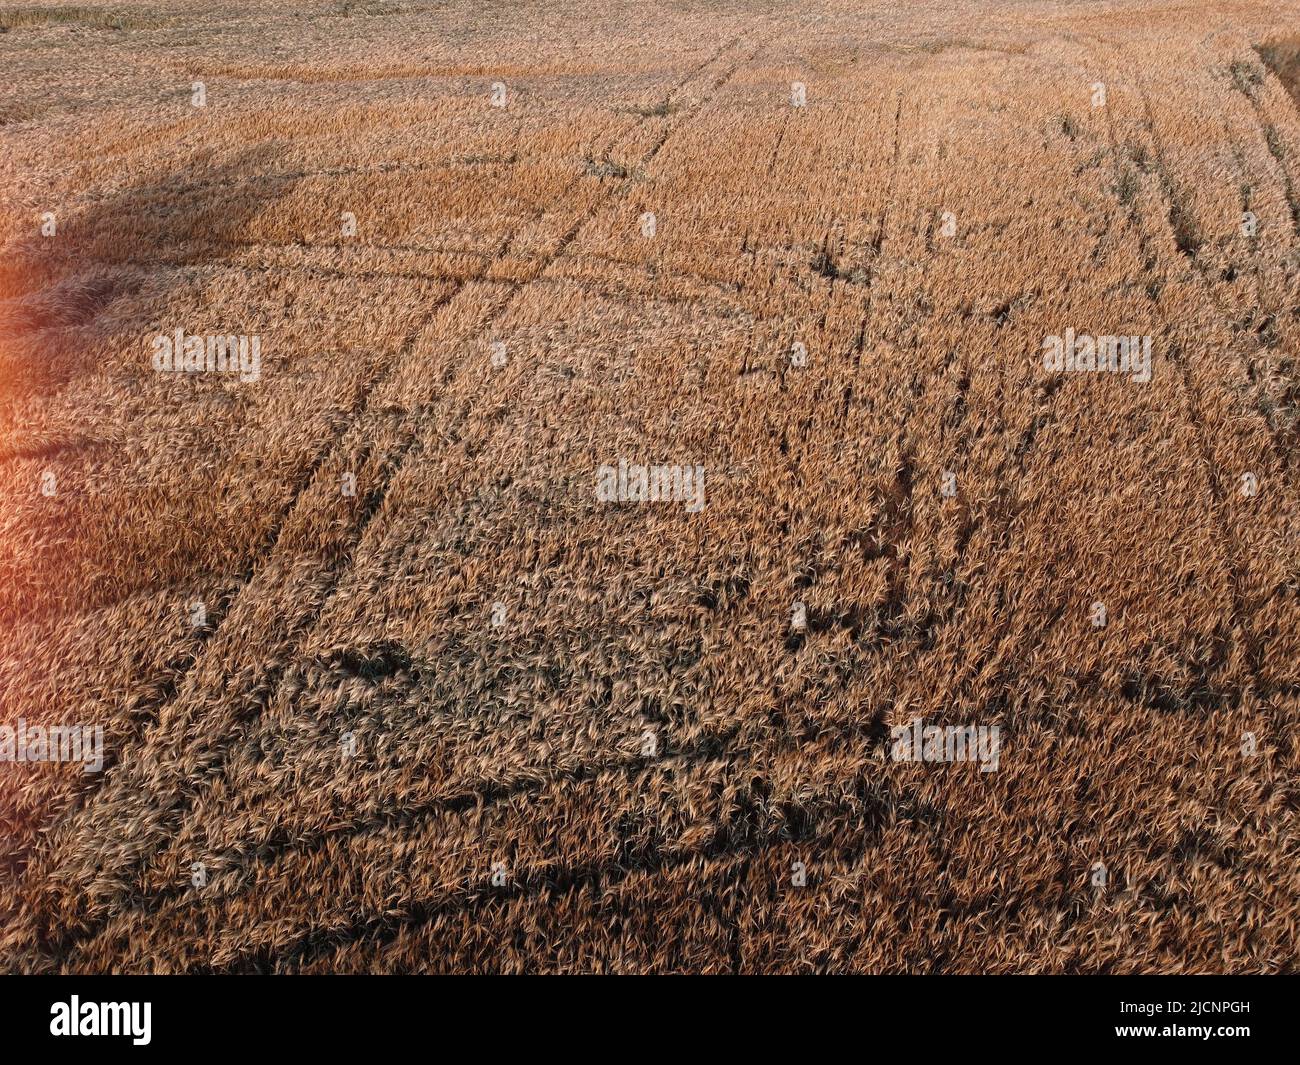 Aerial photography of soft wheat or barley field crop land Stock Photo